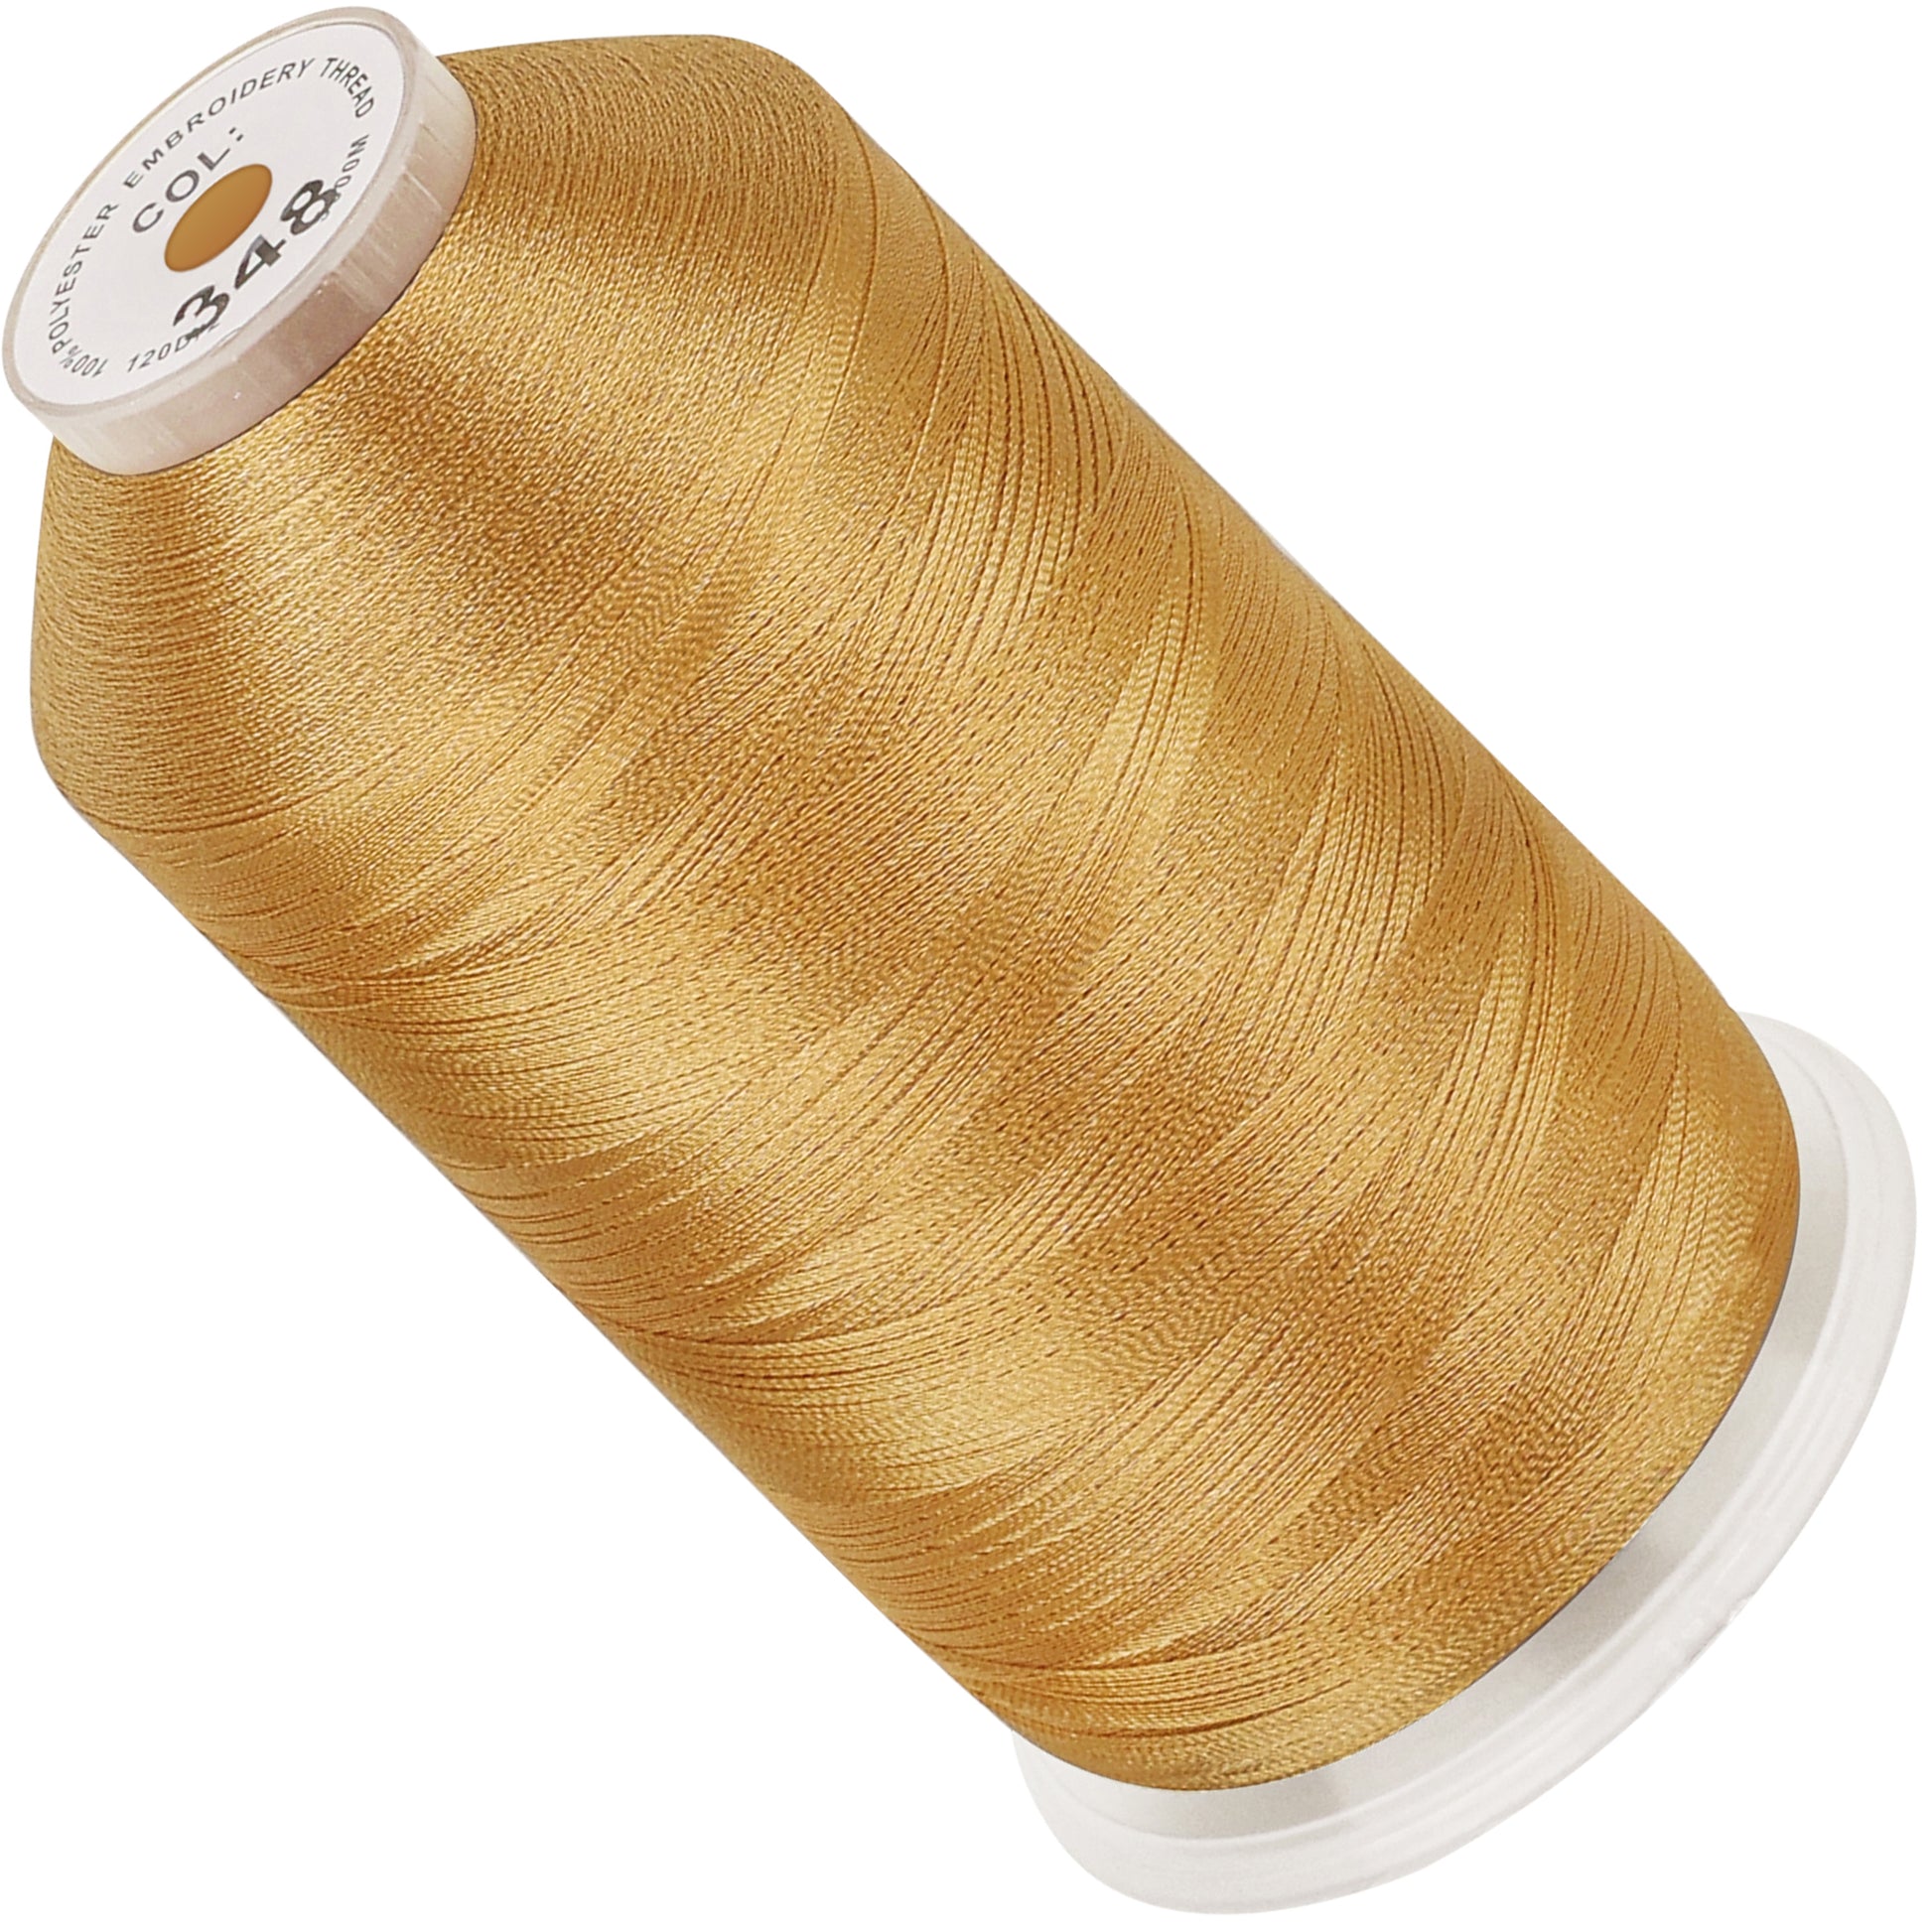 Exquisite New Gold Embroidery Thread 1552 - 5000m